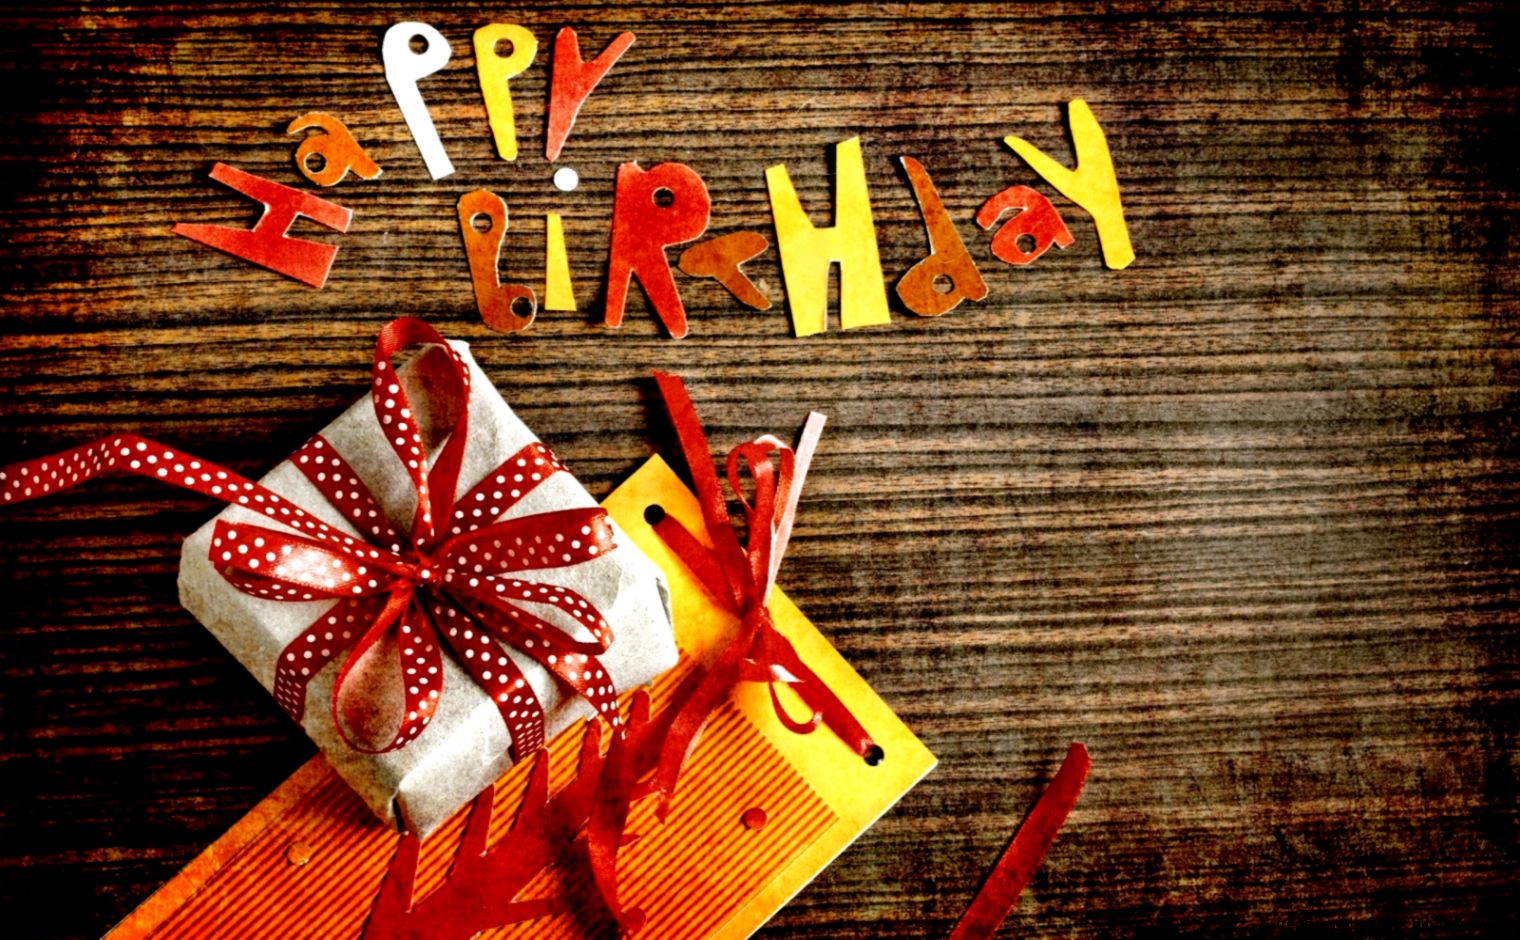 Hd Wallpaper Happy Birthday Gifts | Free Hd Wallpapers